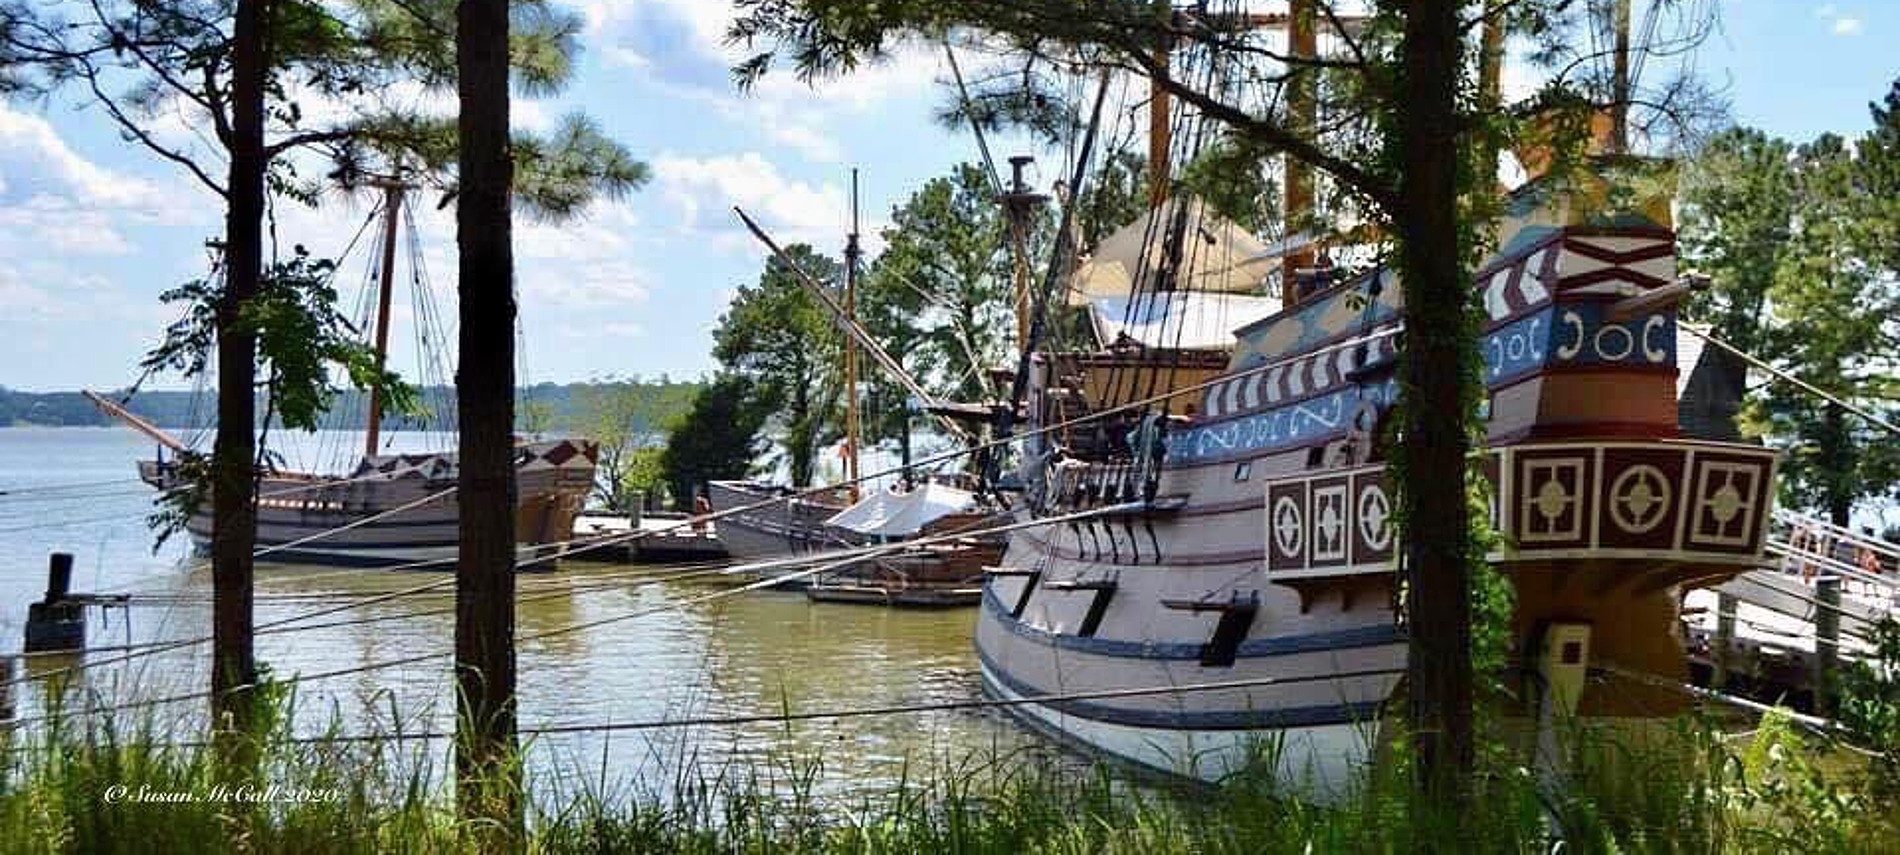 Three pirate style ships docked by a path surrounded by trees